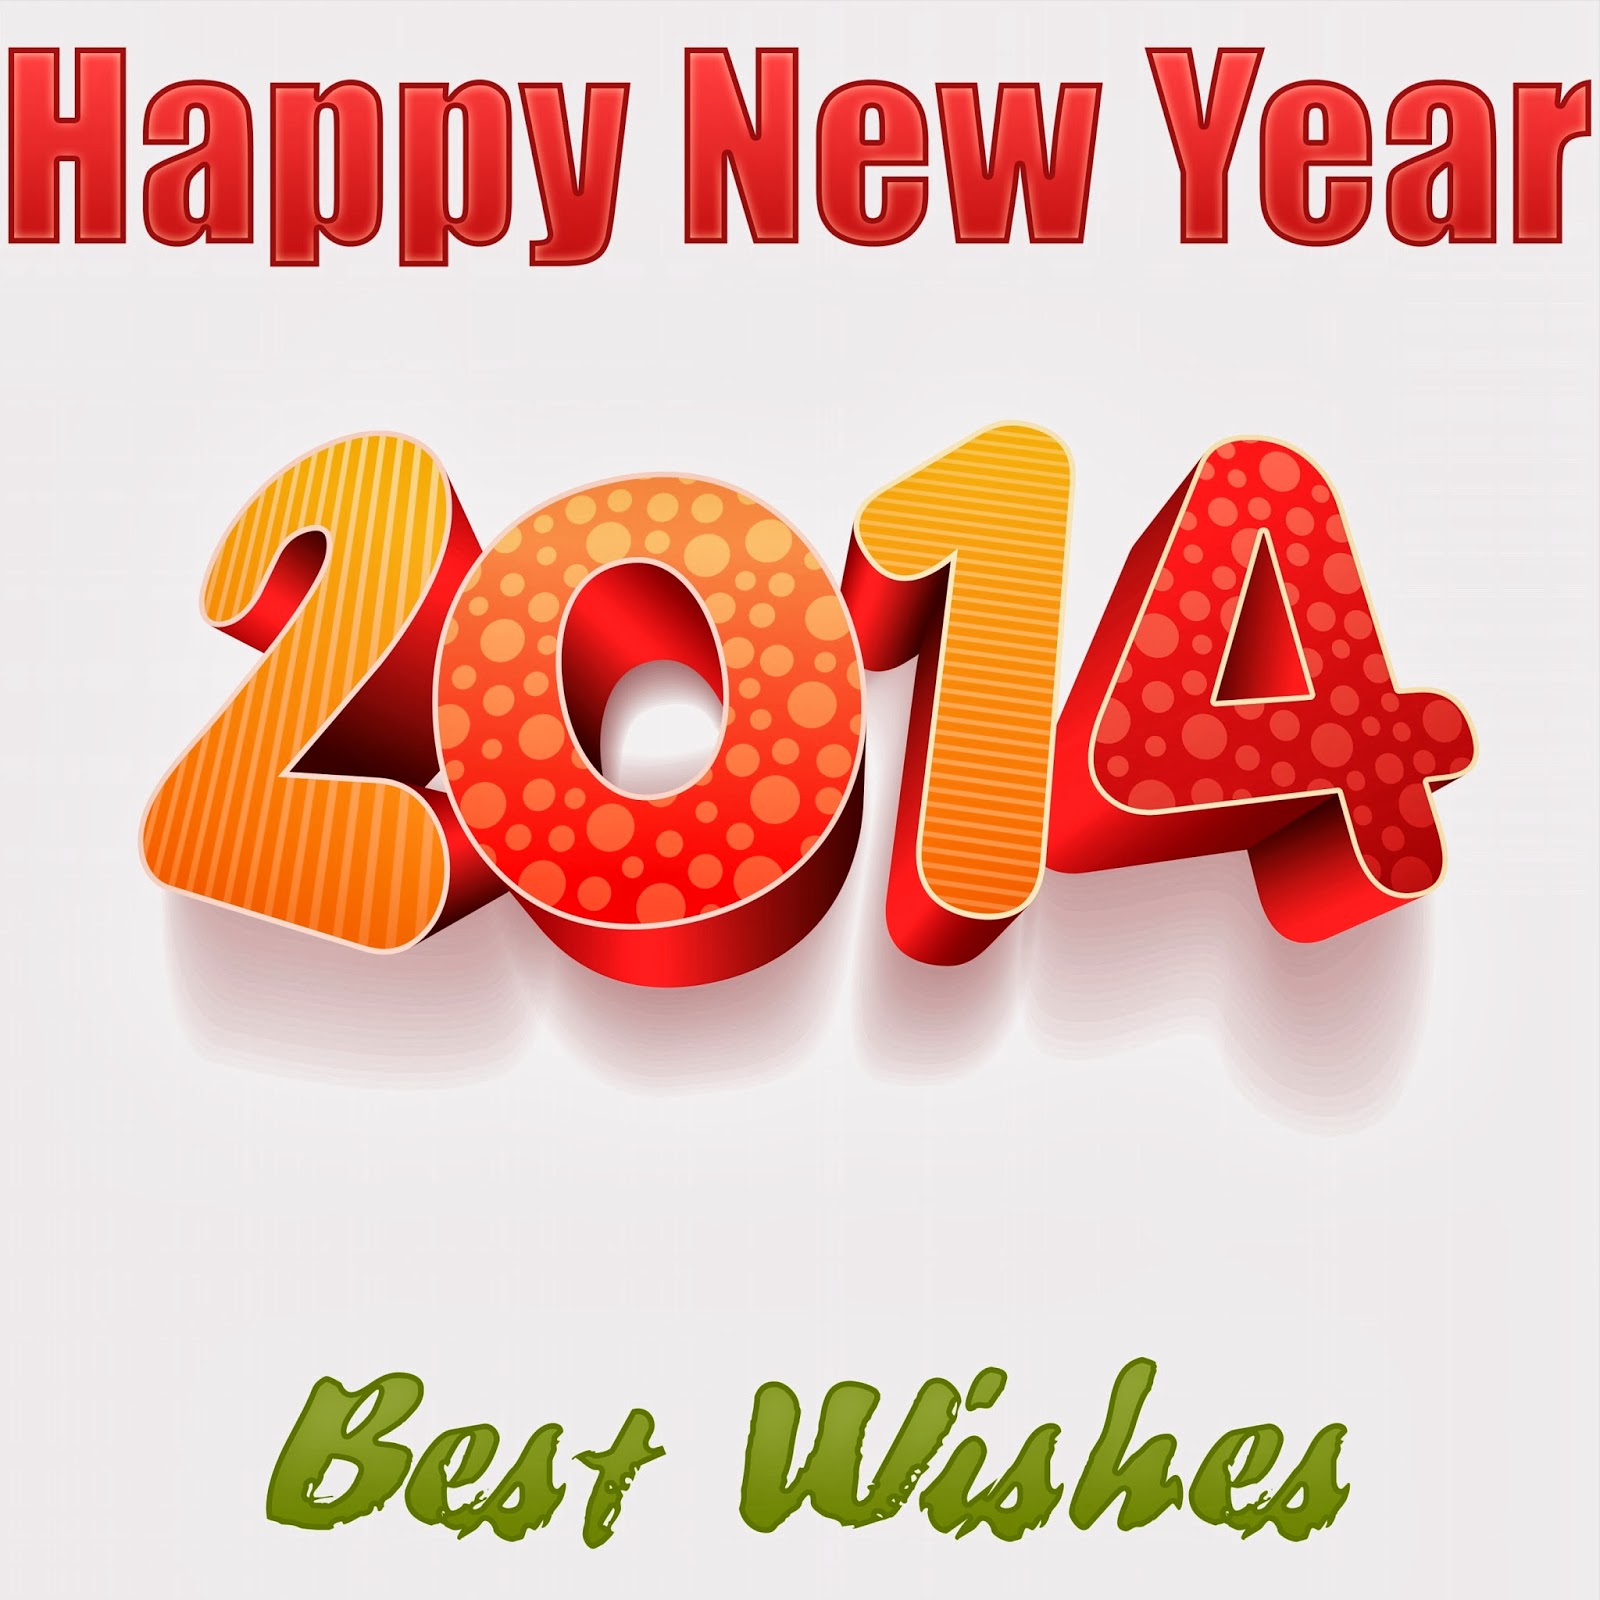 Year 2014 wallpaper for Facebook , Happy New Year 2014 images for FB ...